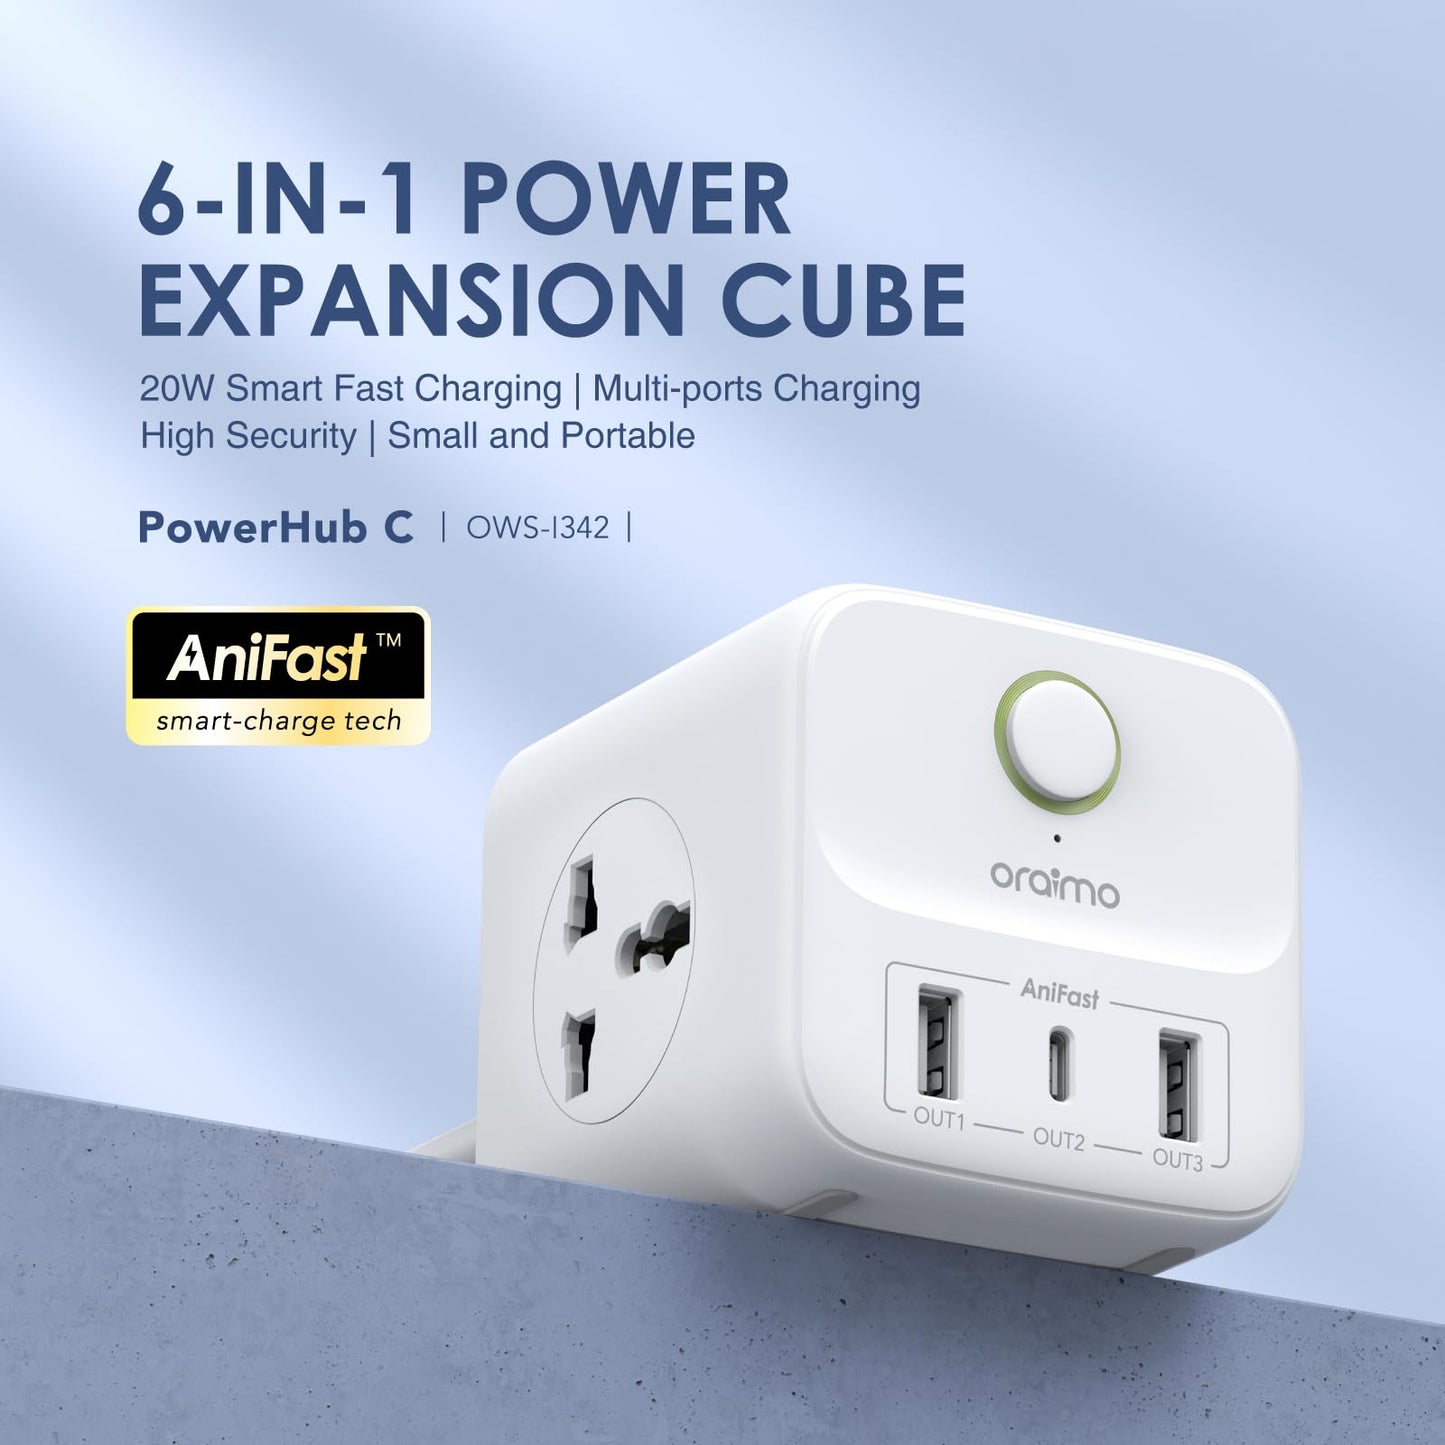 Oraimo 6-in-1 Power Extension Cube – Versatile Power Solution for Your Devices